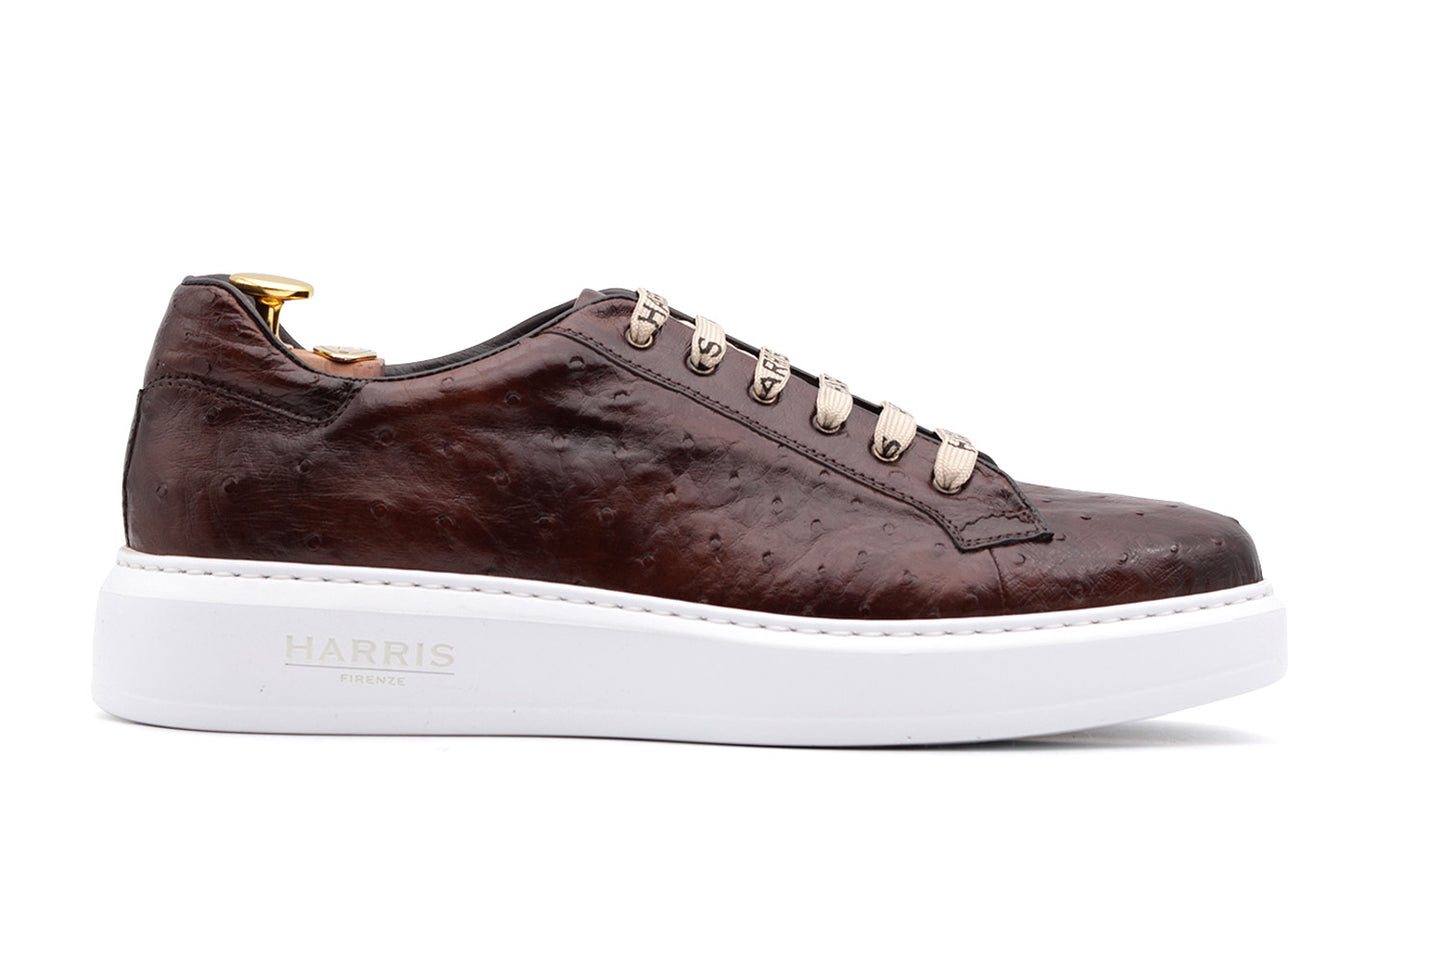 Ostrich leather sneakers